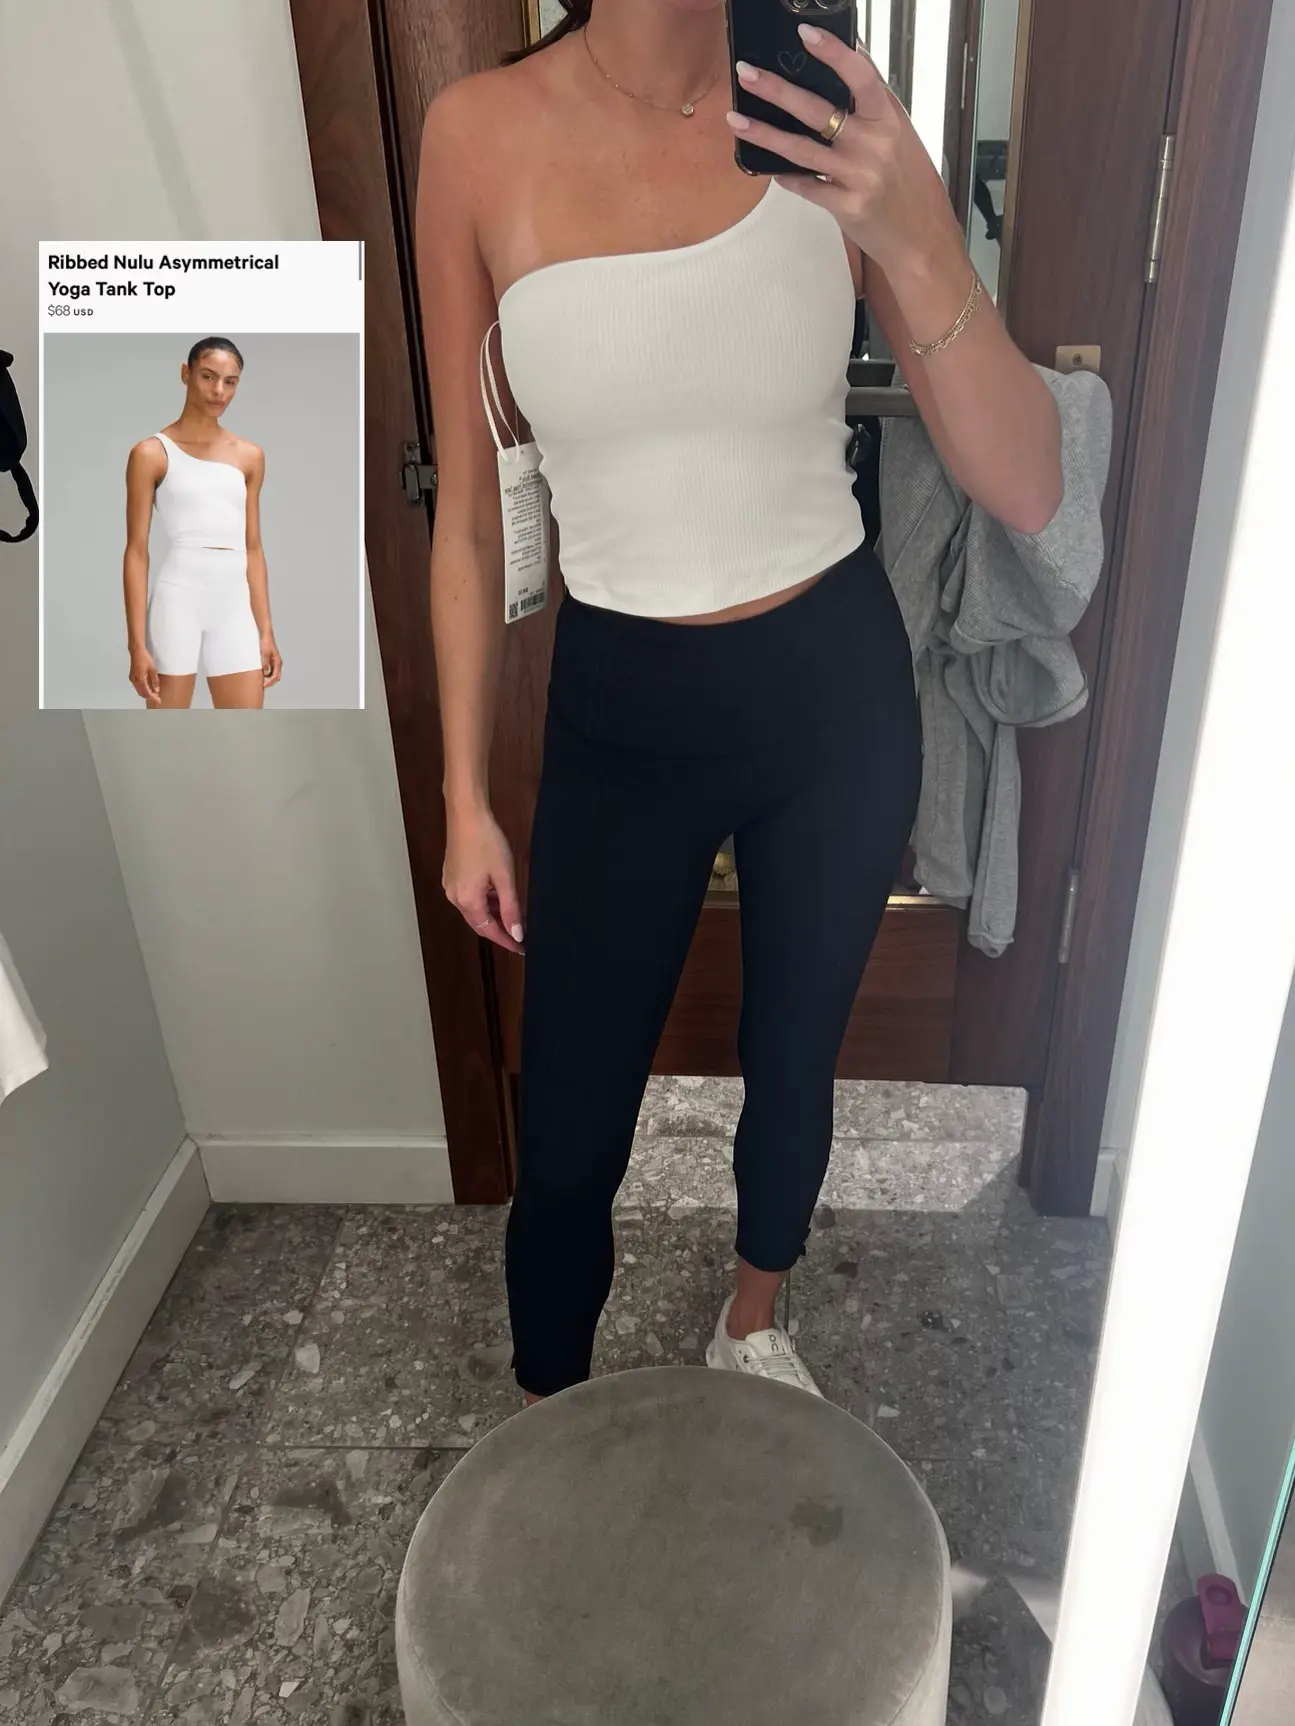 NEW Lululemon Asymmetrical Yoga Tank Top, Gallery posted by Jessica Ferris